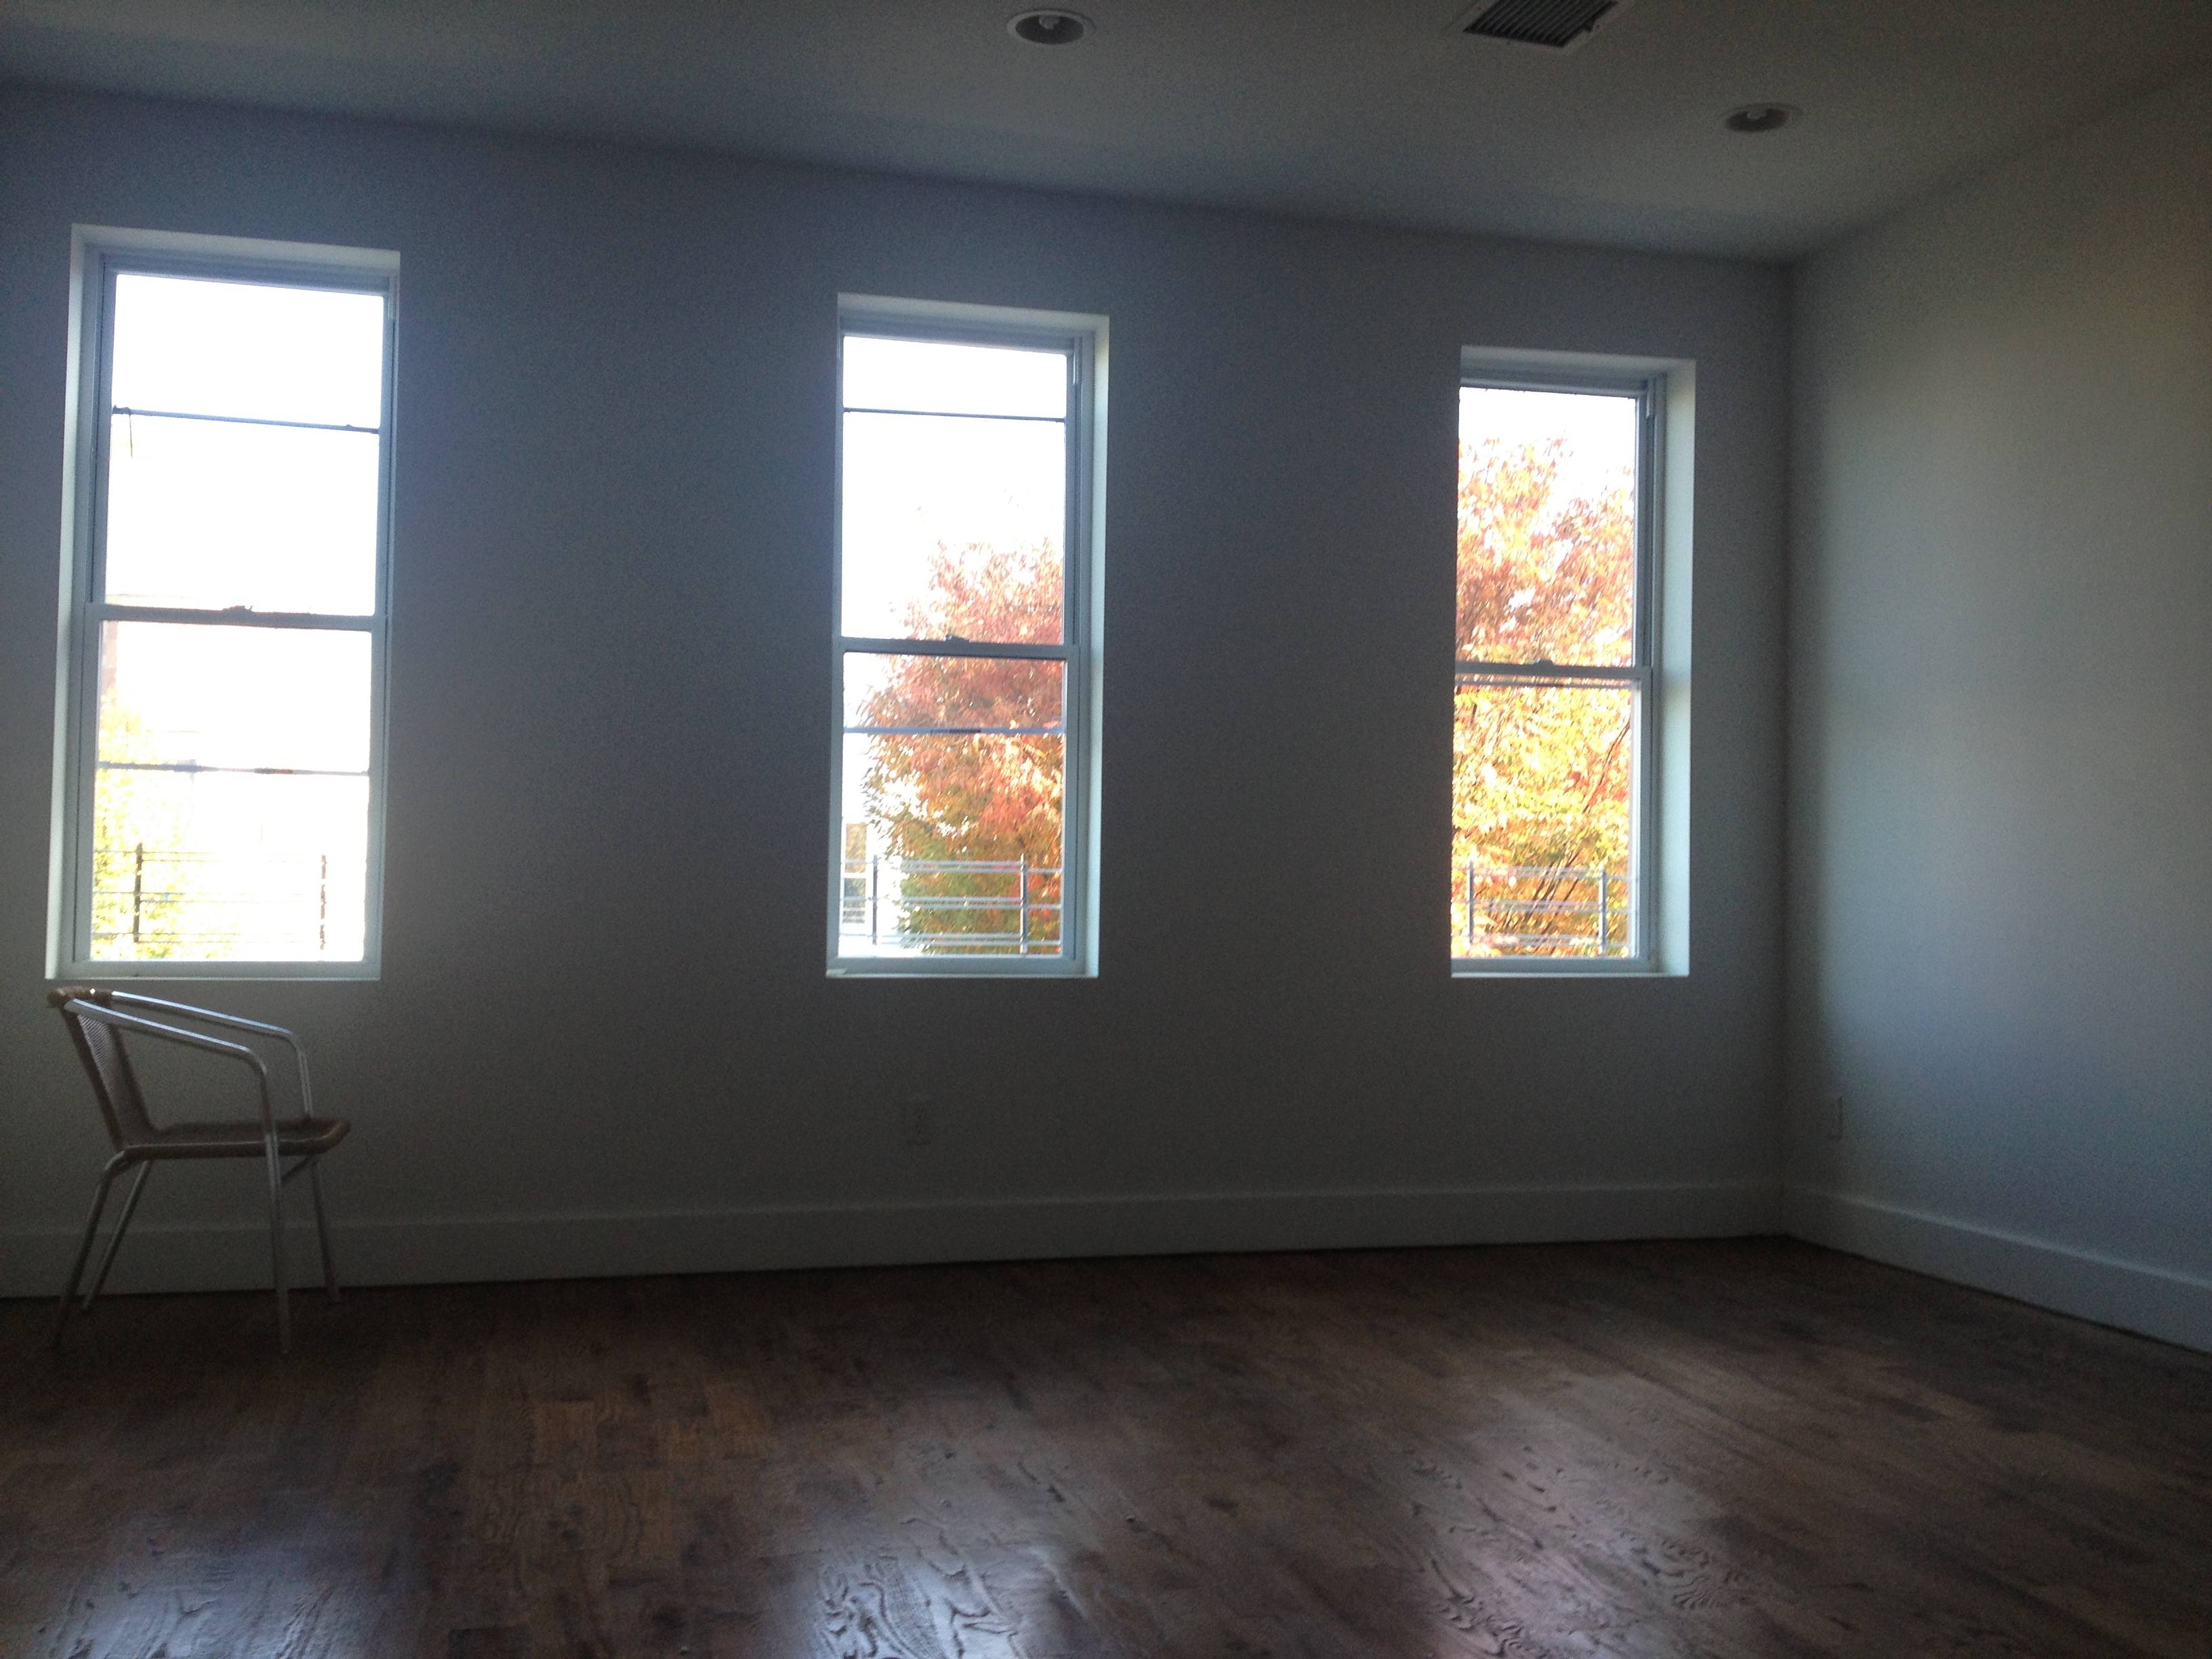 Brand New Fully Renovated 2 bedroom apartment in Bedstuy Brooklyn with Private Back Yard and Parking! No Fee and 1 month free